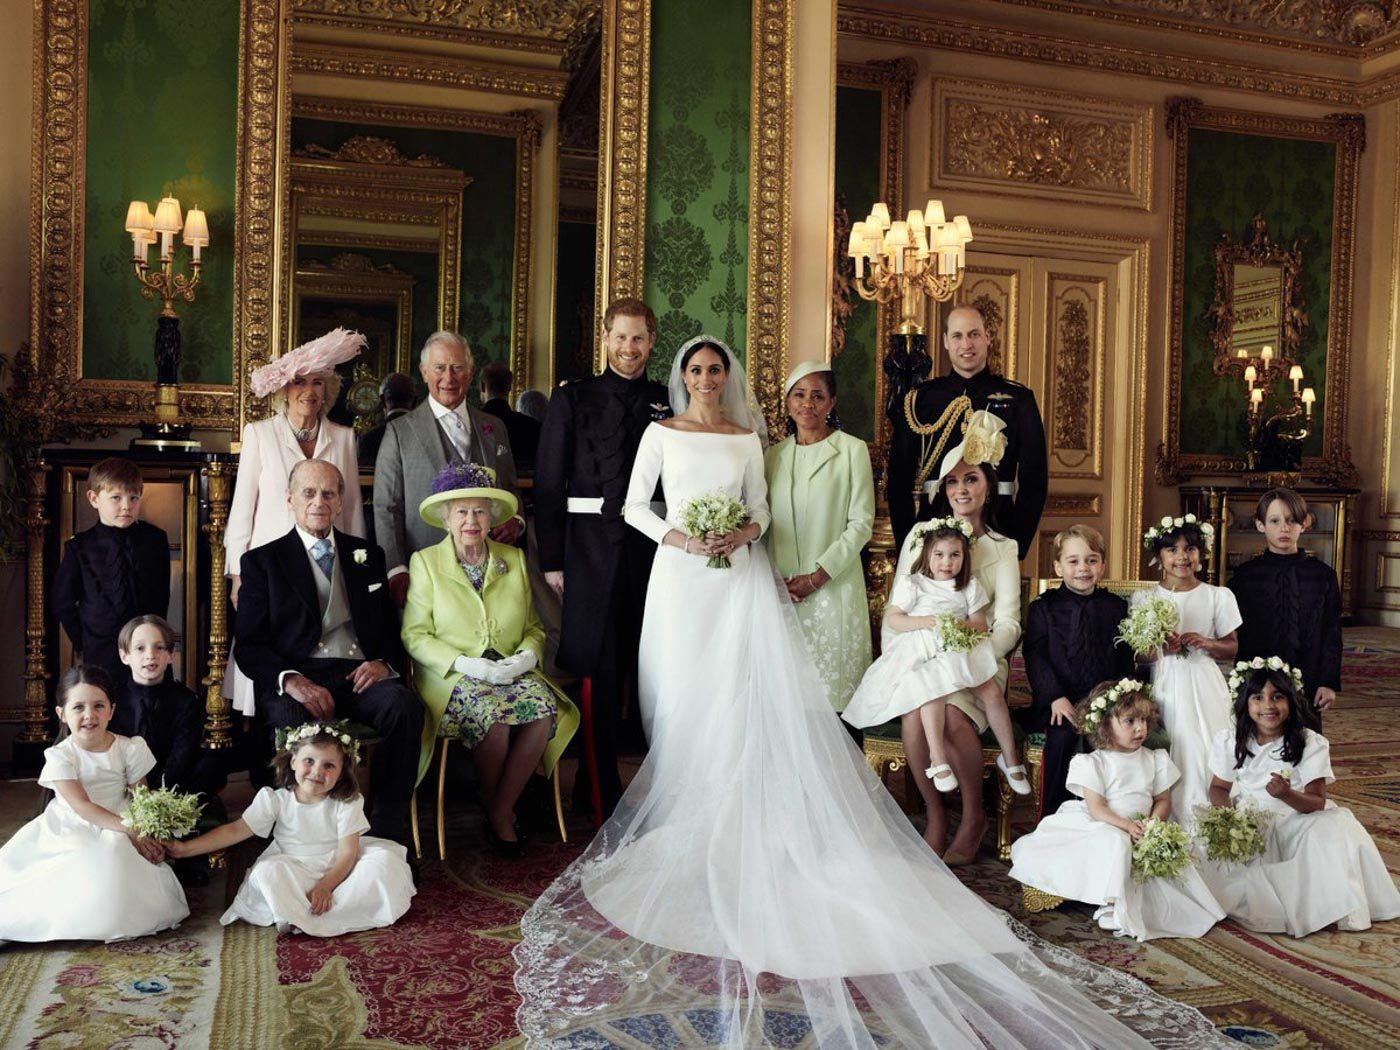 LOOK: Harry and Meghan, Duke and Duchess of Sussex’s wedding portraits